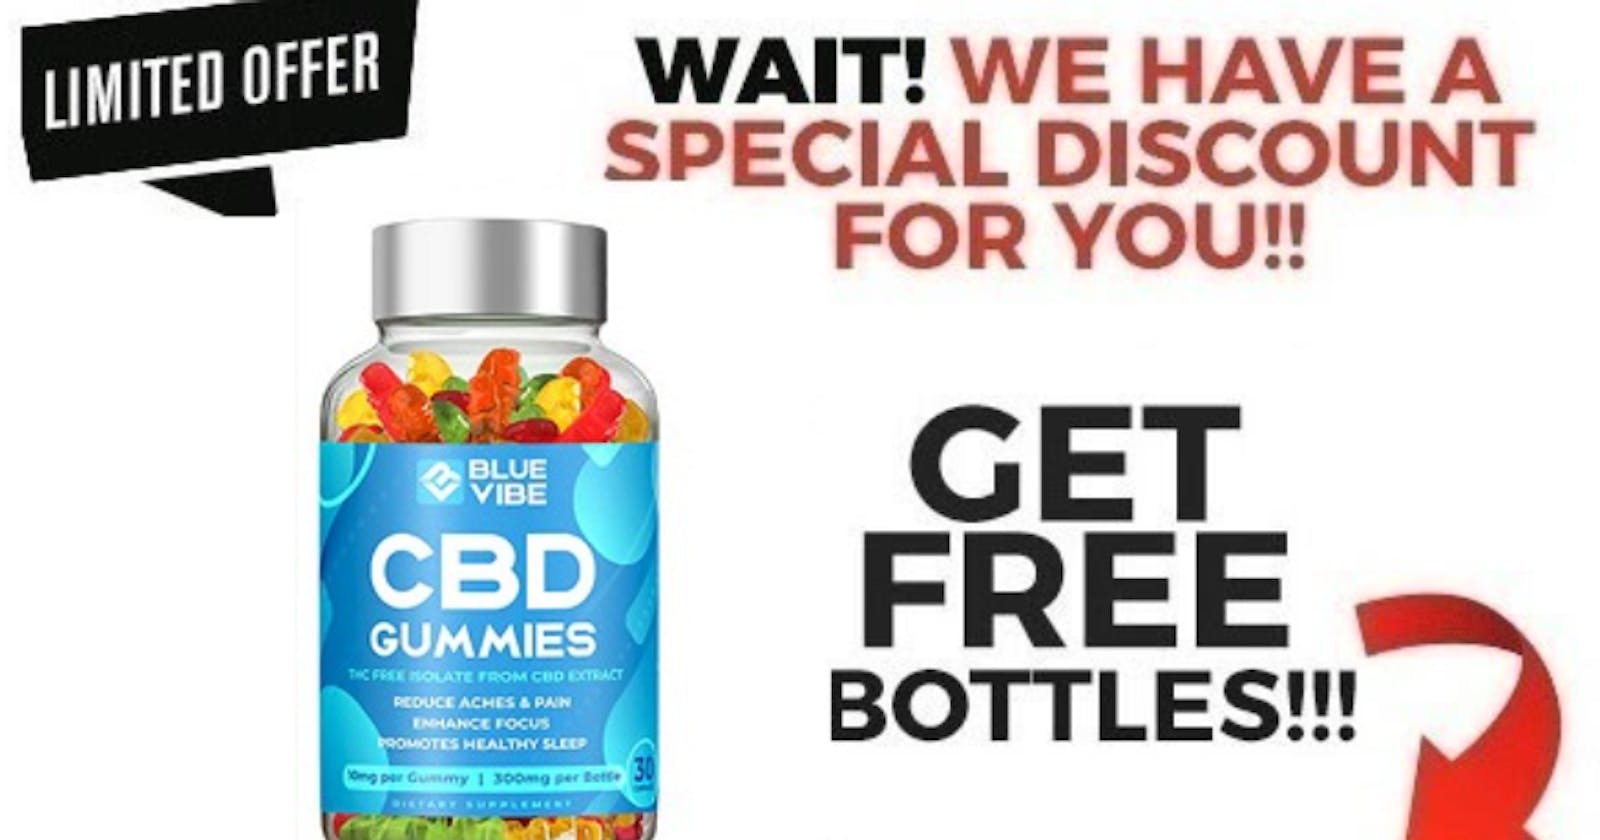 Blue Vibe CBD Gummies Reviews, Price, Amazon, Cost, ingredients, For Diabetes & Where To Buy?